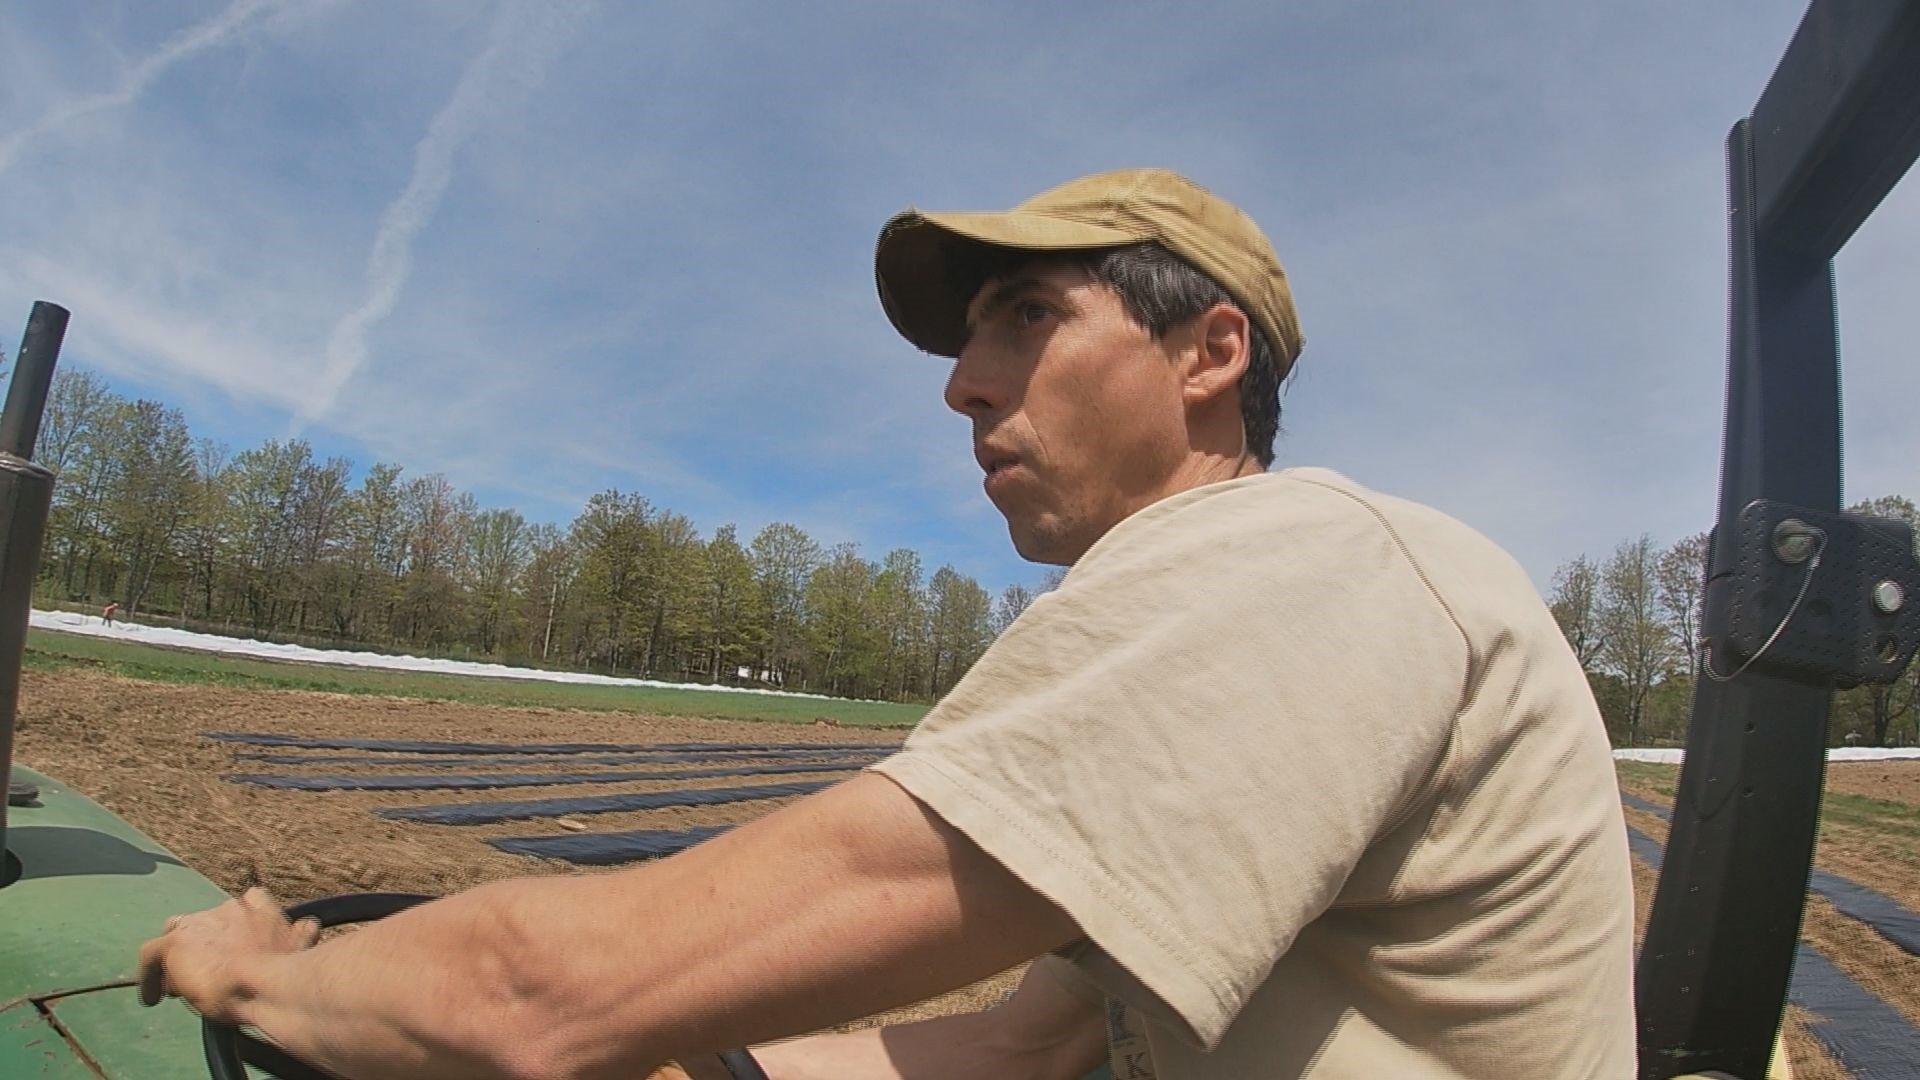 Many small farms in Maine are seeing a boom in business as customers head directly to them for local produce, meat, and dairy. But will the trend continue?